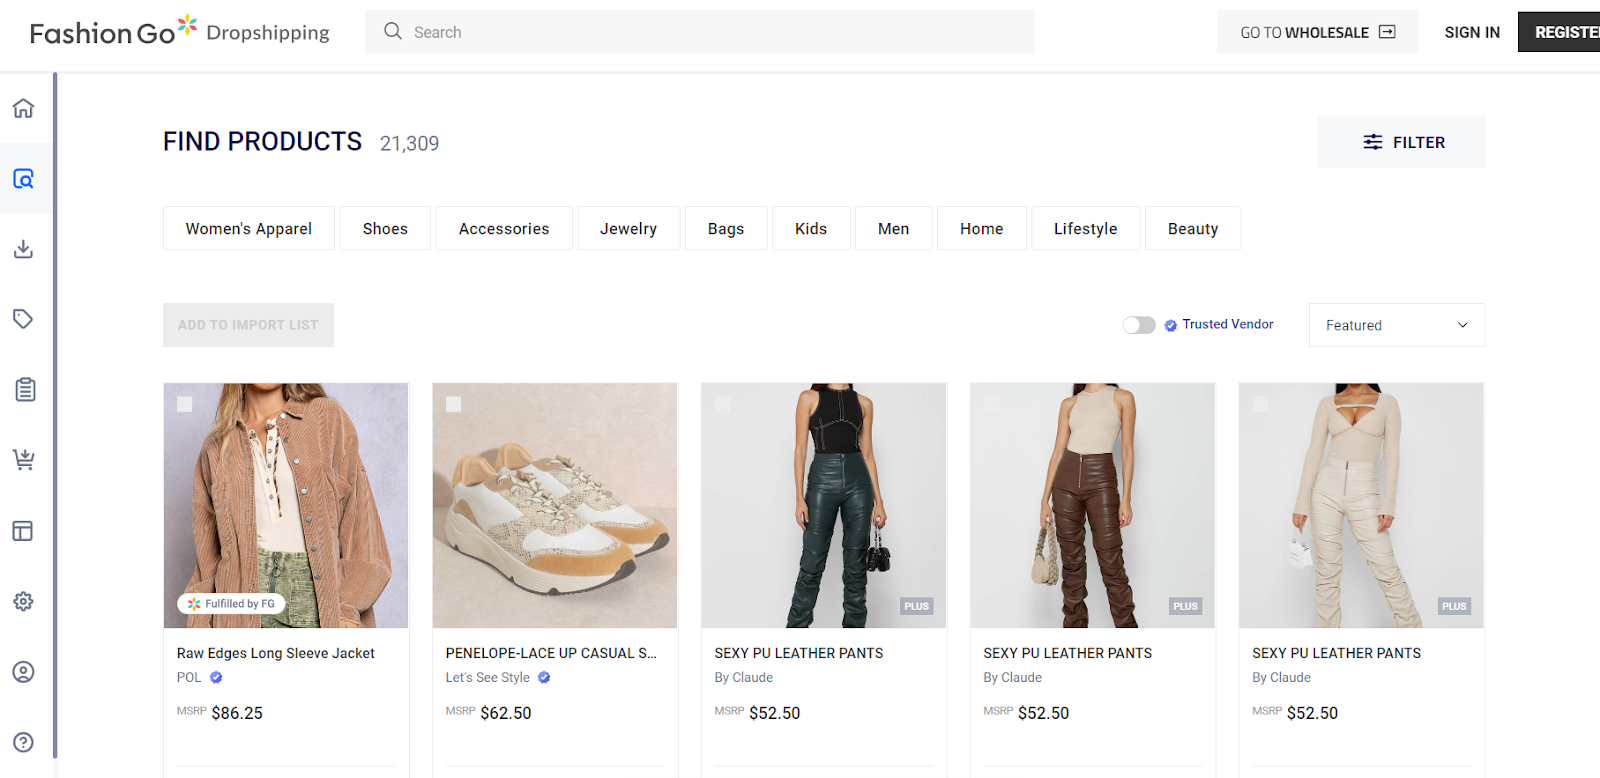 FashionGo Review: Is This the Future of Fashion Dropshipping?